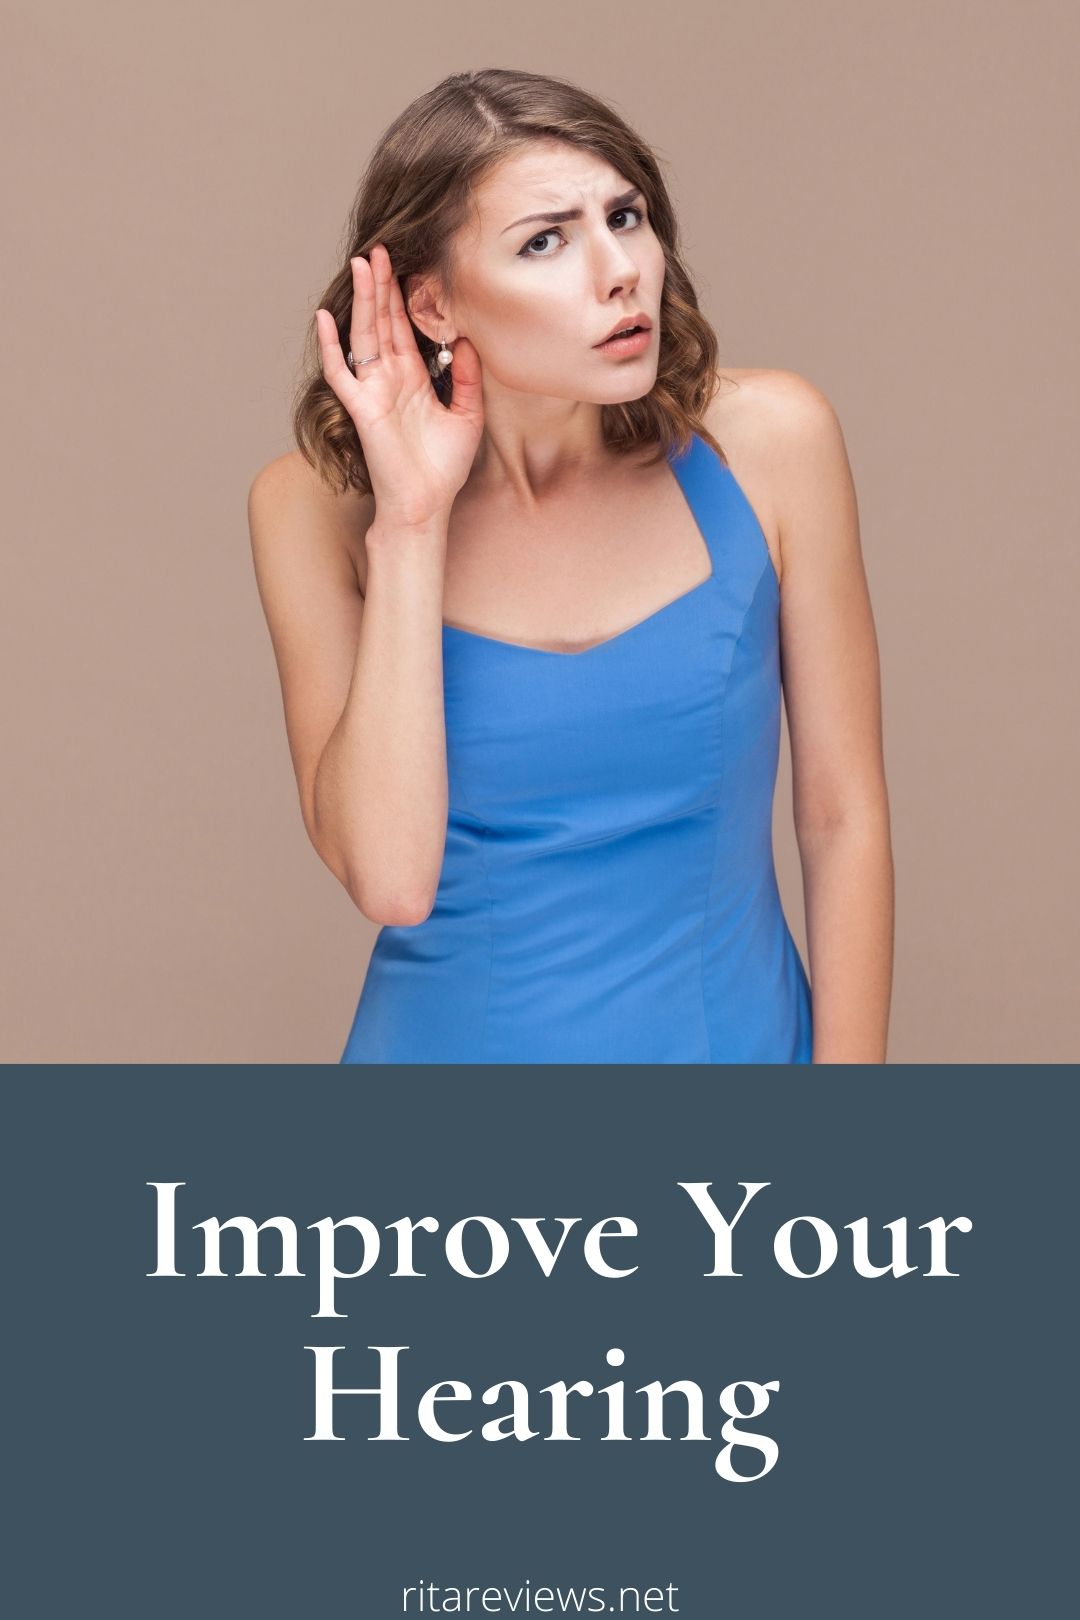 5 Things You Can do to Improve Your Hearing